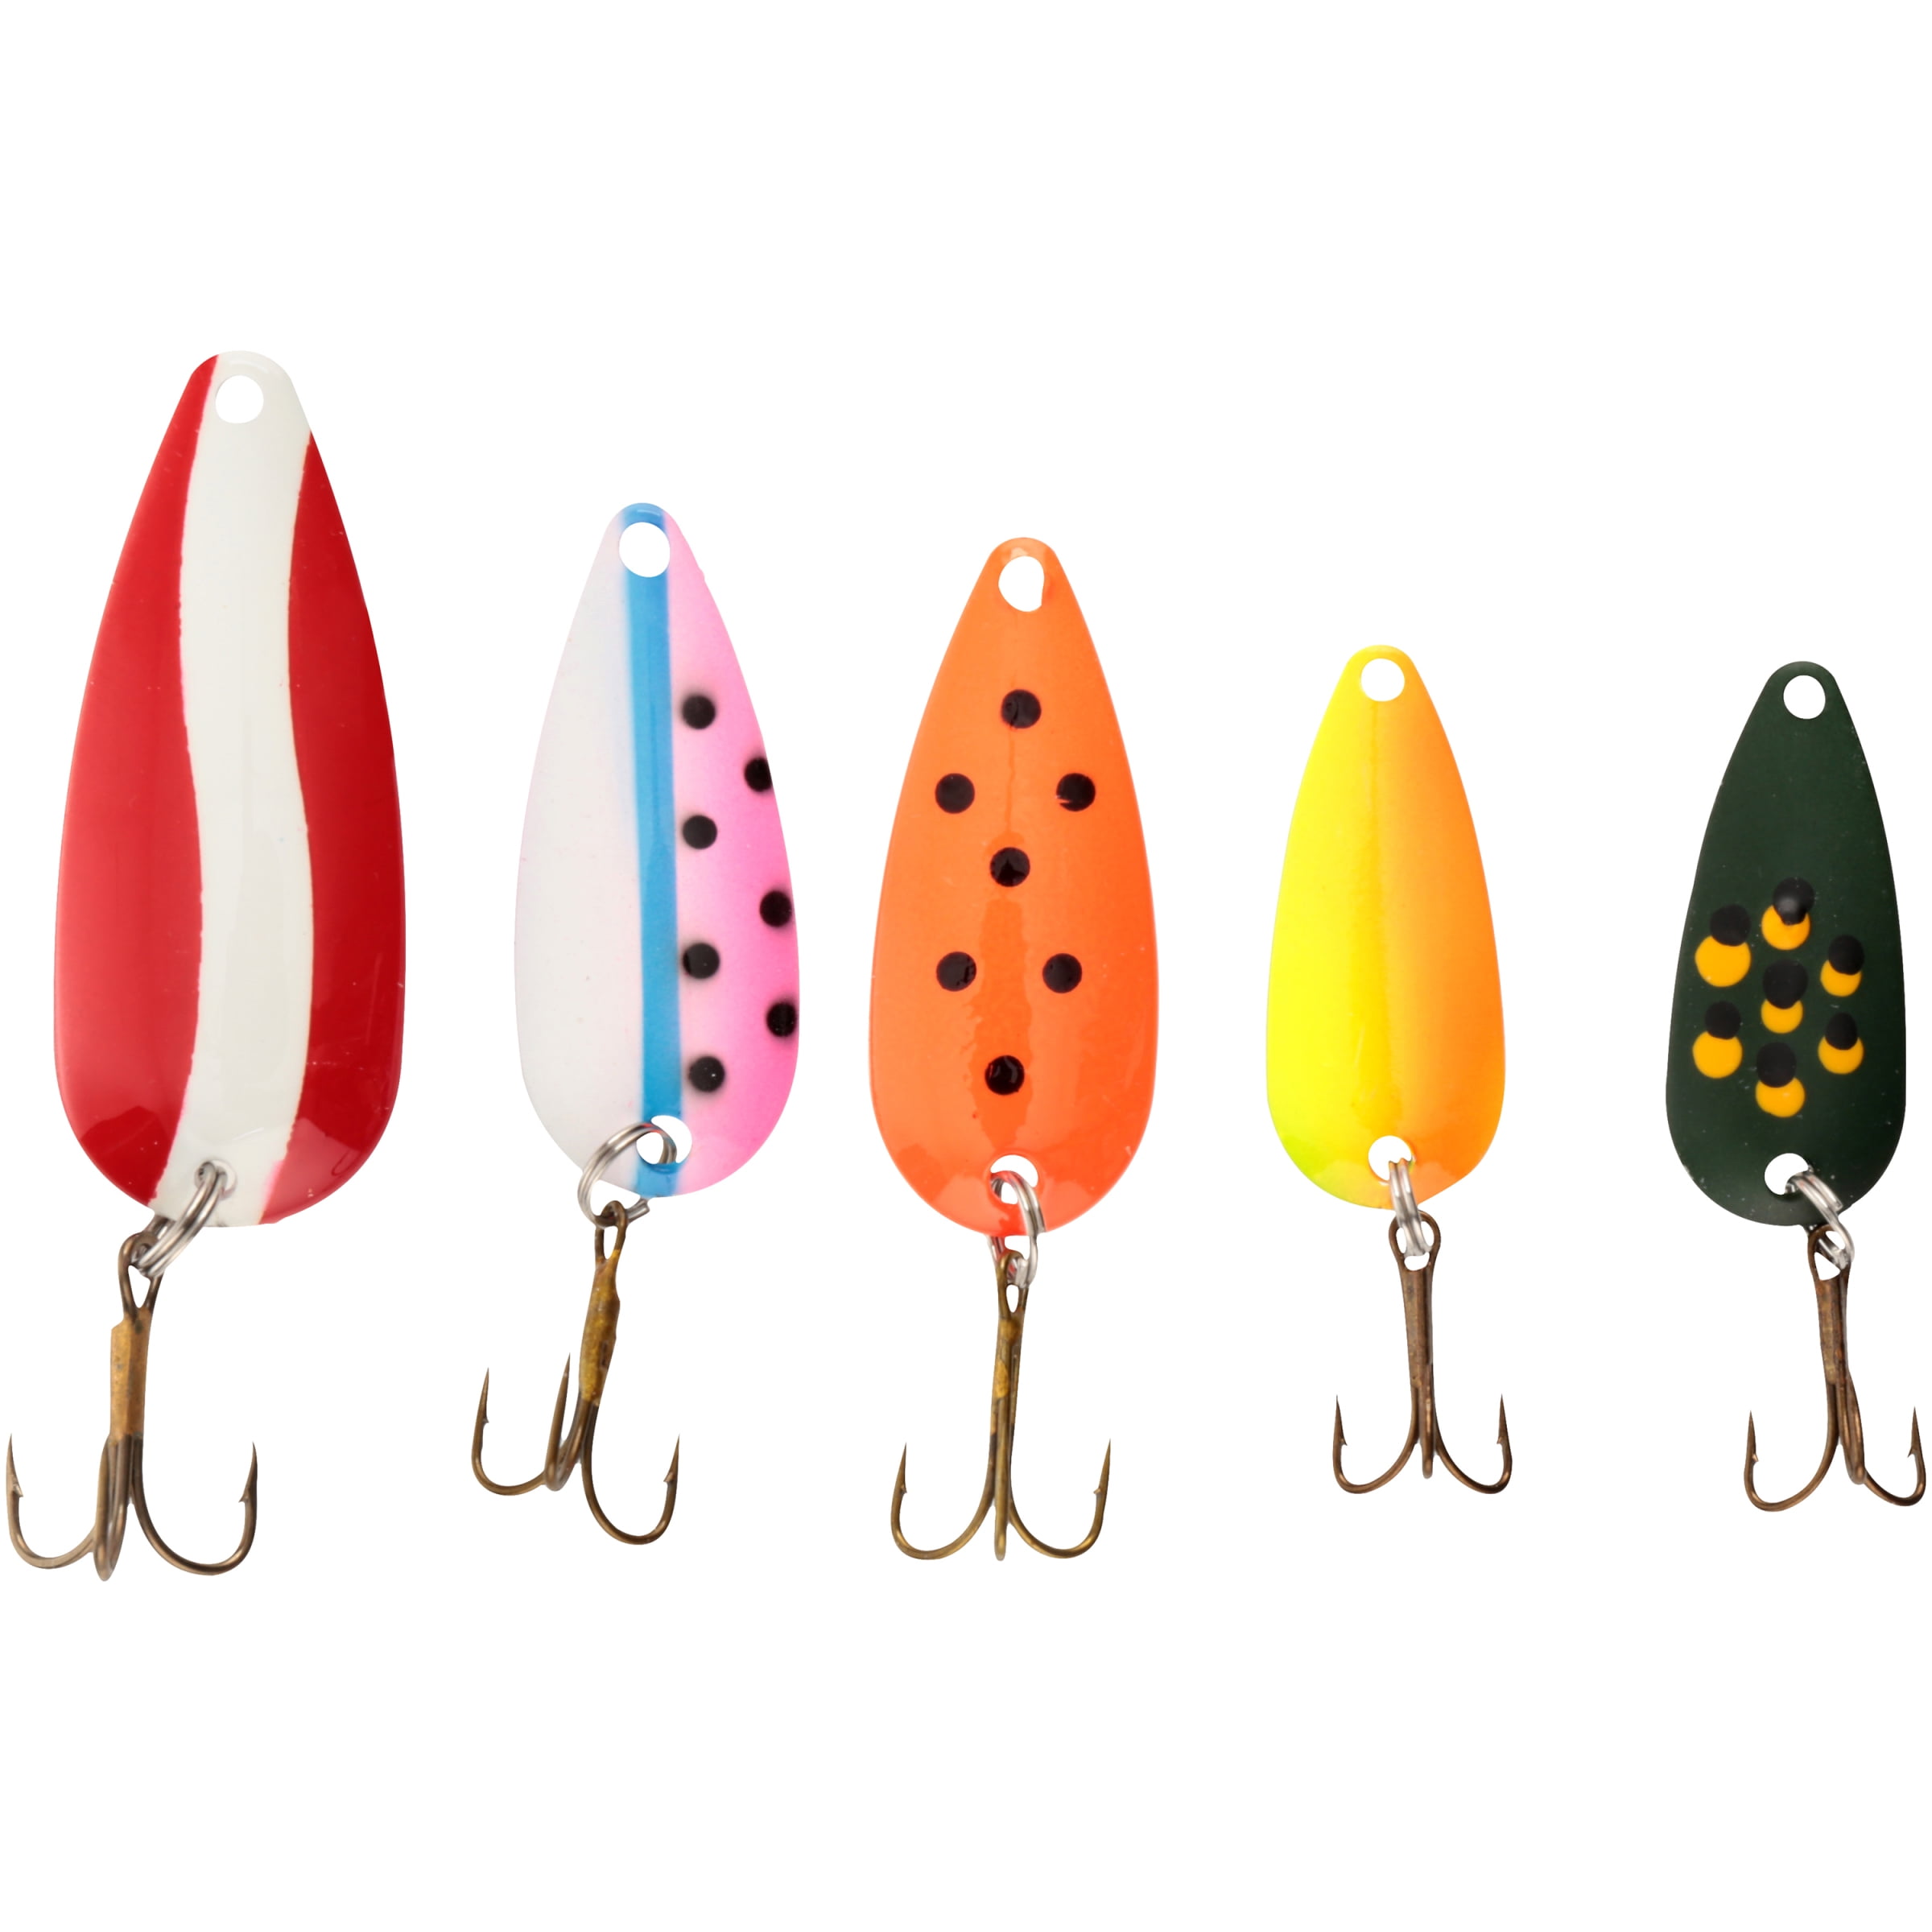 5 X FISH FISHING TOOL TACKLE LURE SPOON HOOKS SUPPORT ACCESSORIES SMALL 